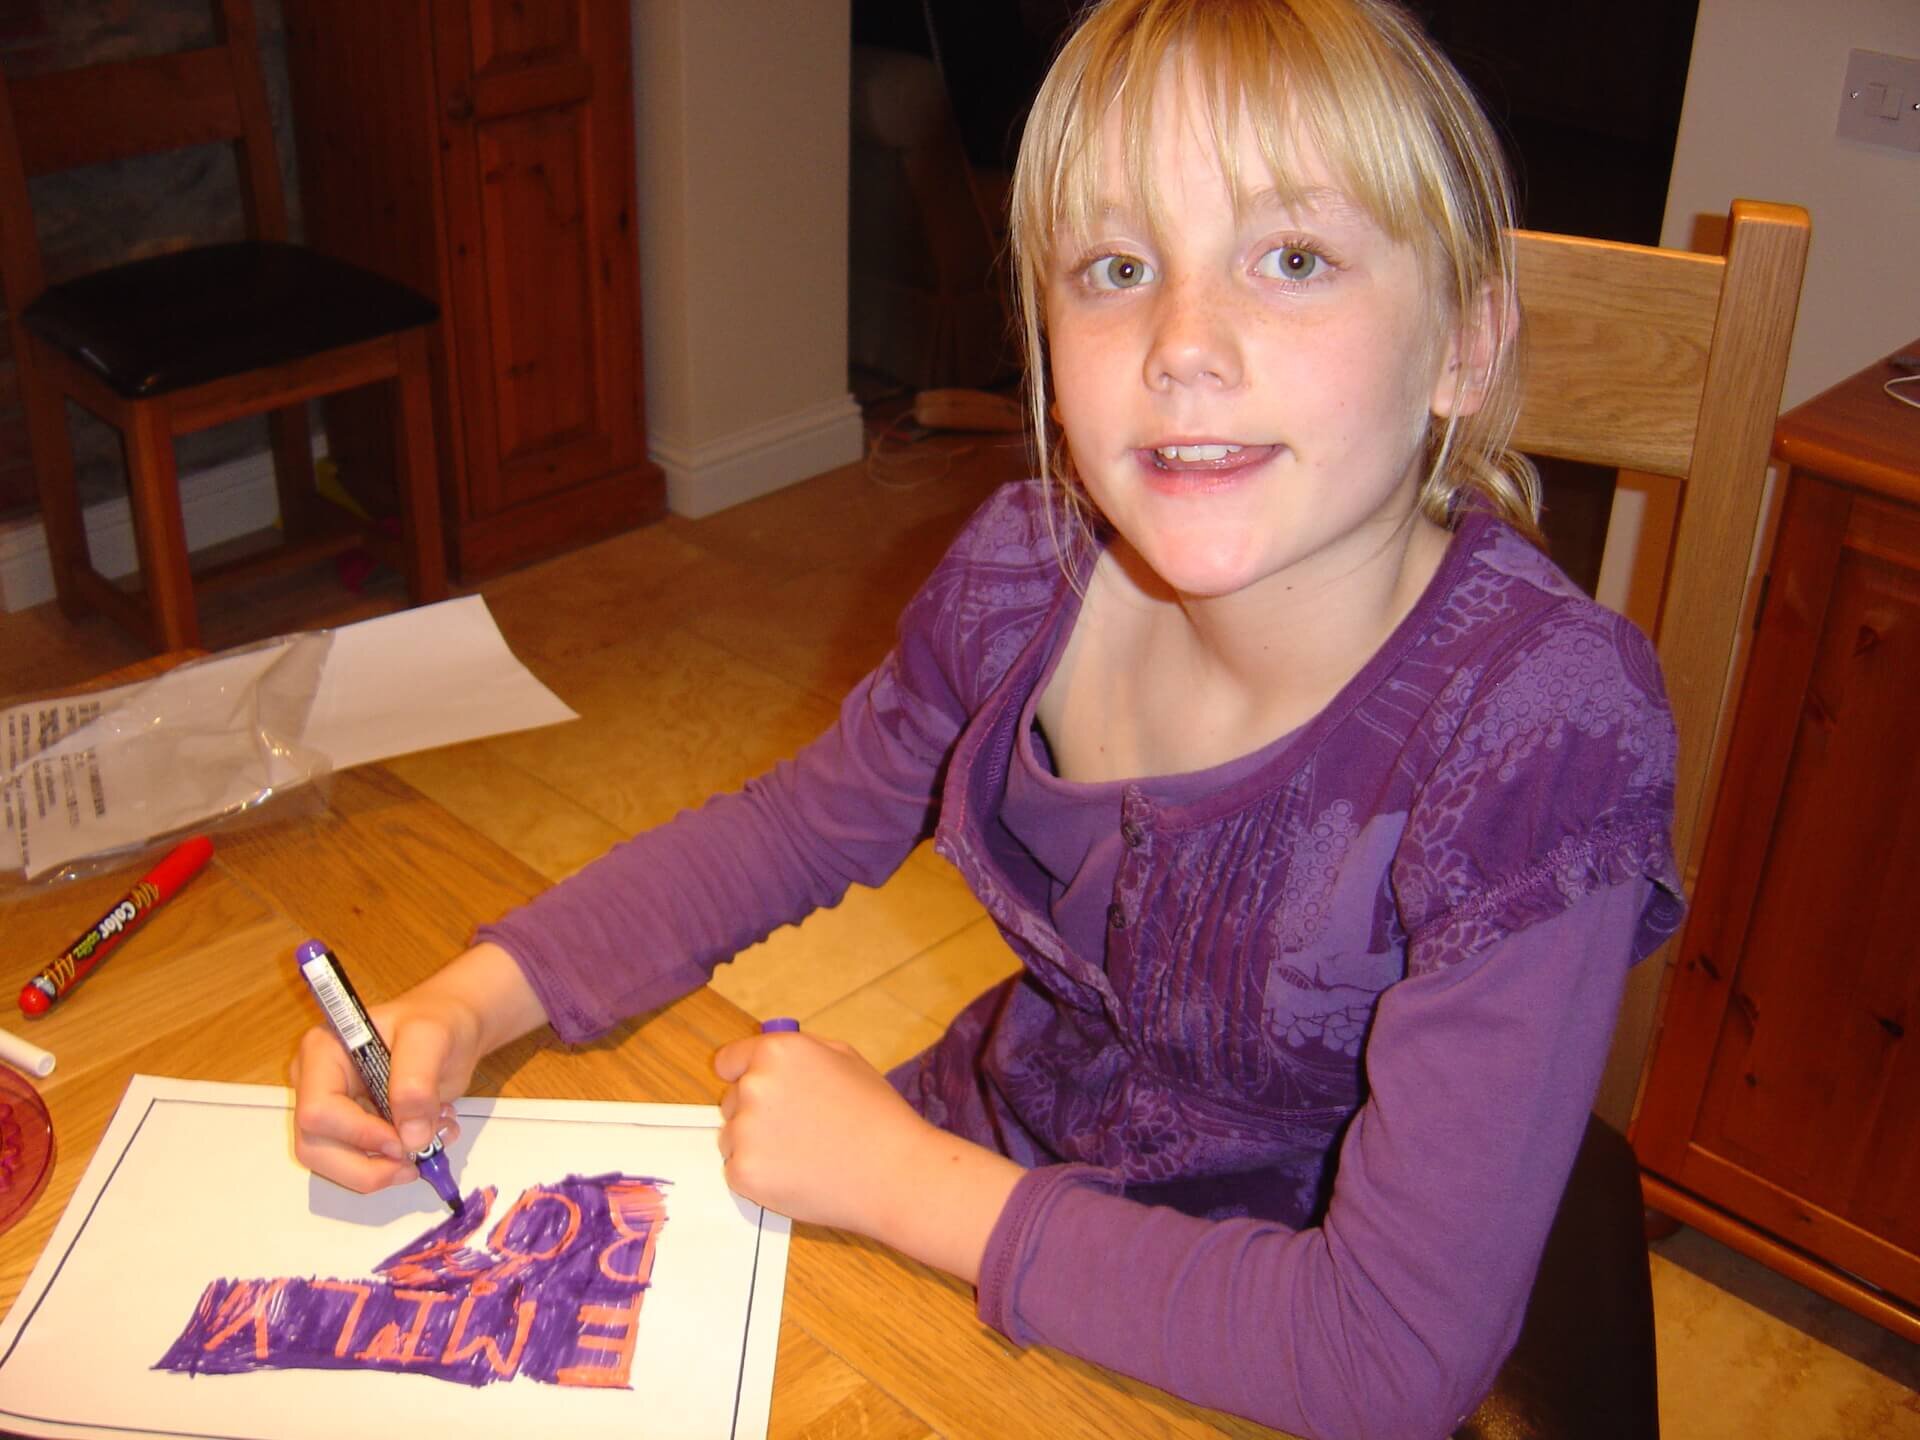 Young Emily colouring in at a table.